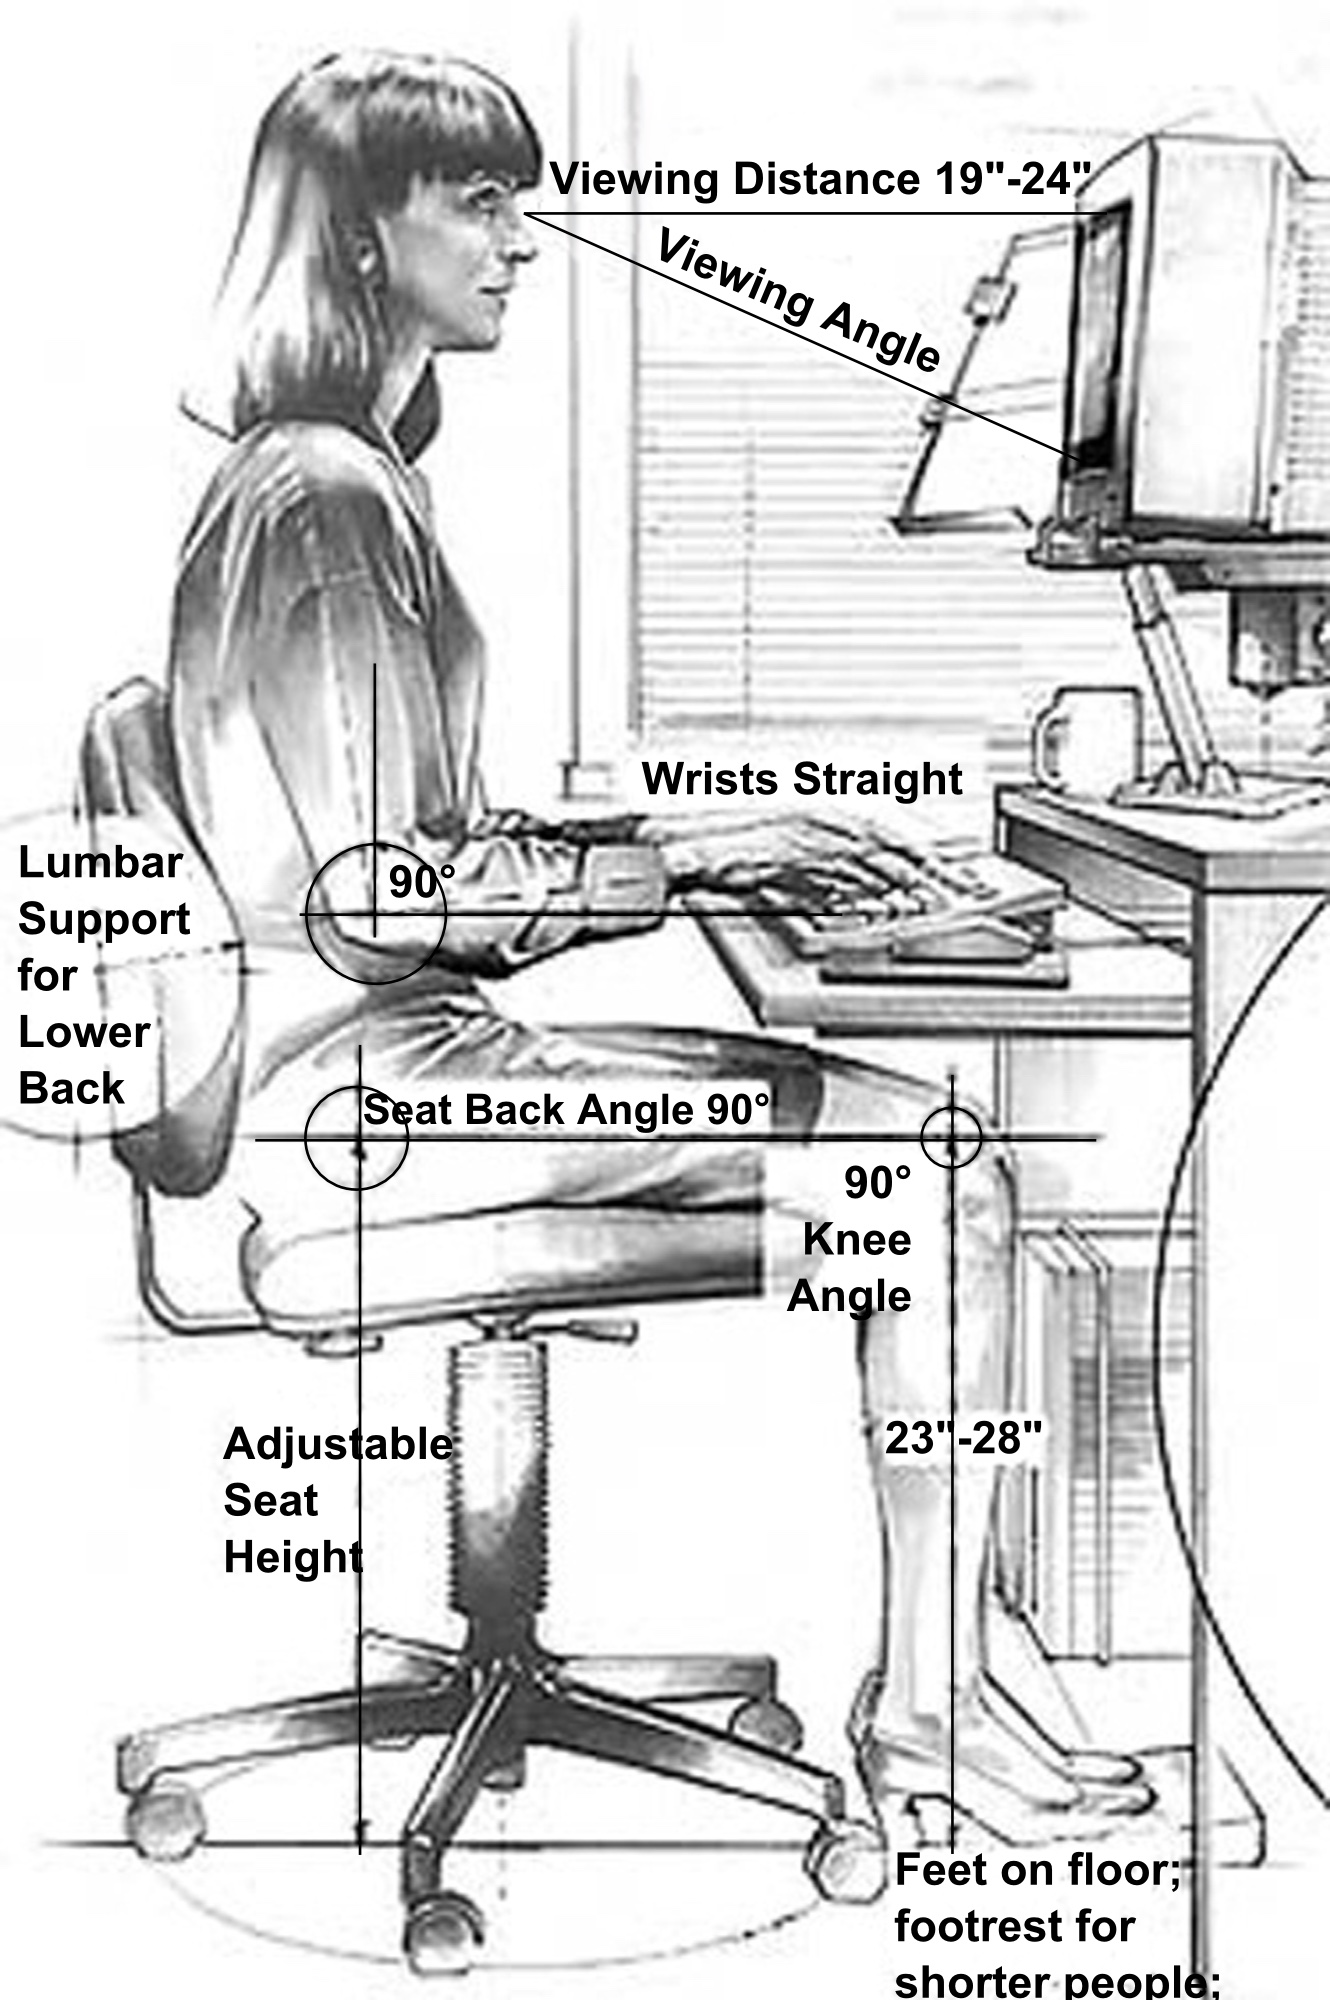 Illustration of a woman sitting upright in front of a computer from the 1980s. Overlaid lines annotate her correct posture: sitting 19 to 24 inches in front of the monitor, top of the monitor at eye level, arms bent at a 90 degree angle, wrists straight, chair providing lumbar support for the lower back, seat back upright, adjustable seat height set between 23 and 28 inches, knees bent at 90 degrees, and feet firmly planted on a footrest.